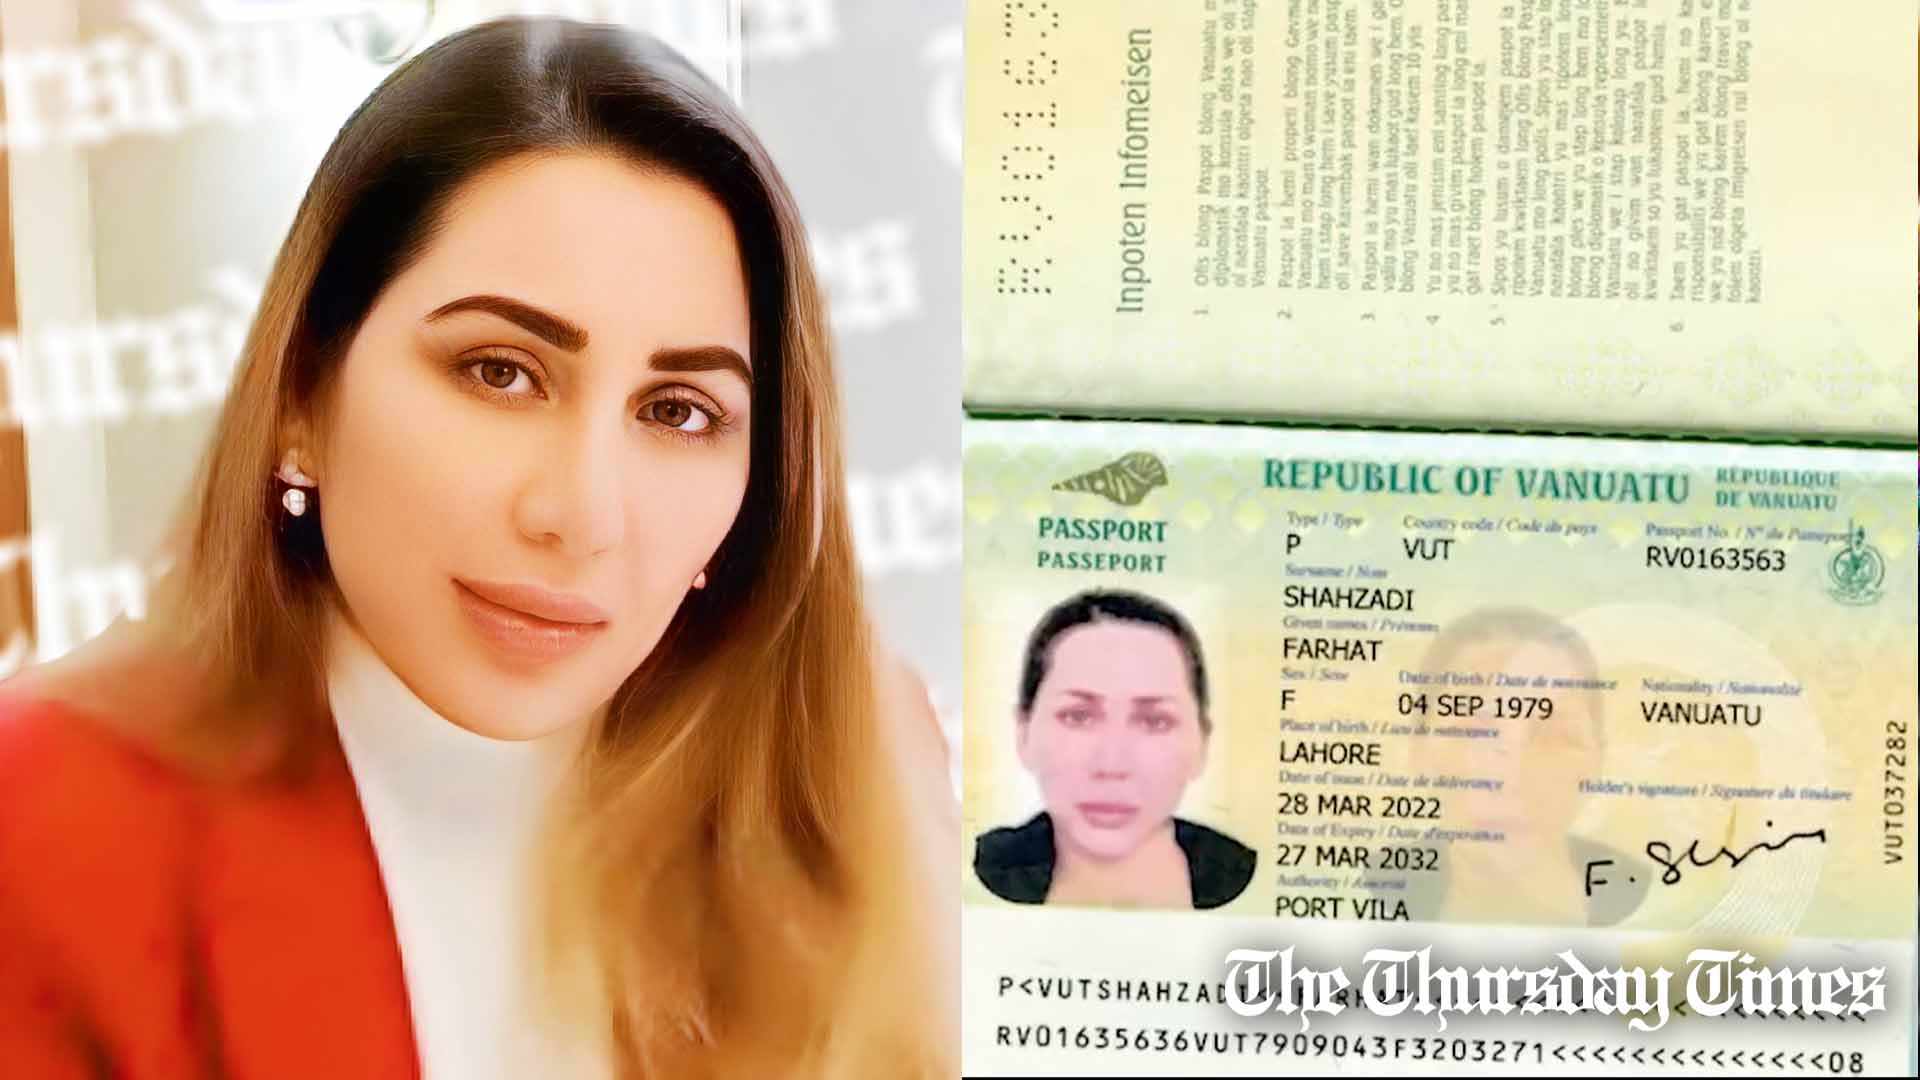 A combined file photo is shown of PTI associate Farhat Shahzadi, alias Farah Gogi (L) and a Vanuatu passport allegedly belonging to the aforementioned (R). — FILE/THE THURSDAY TIMES